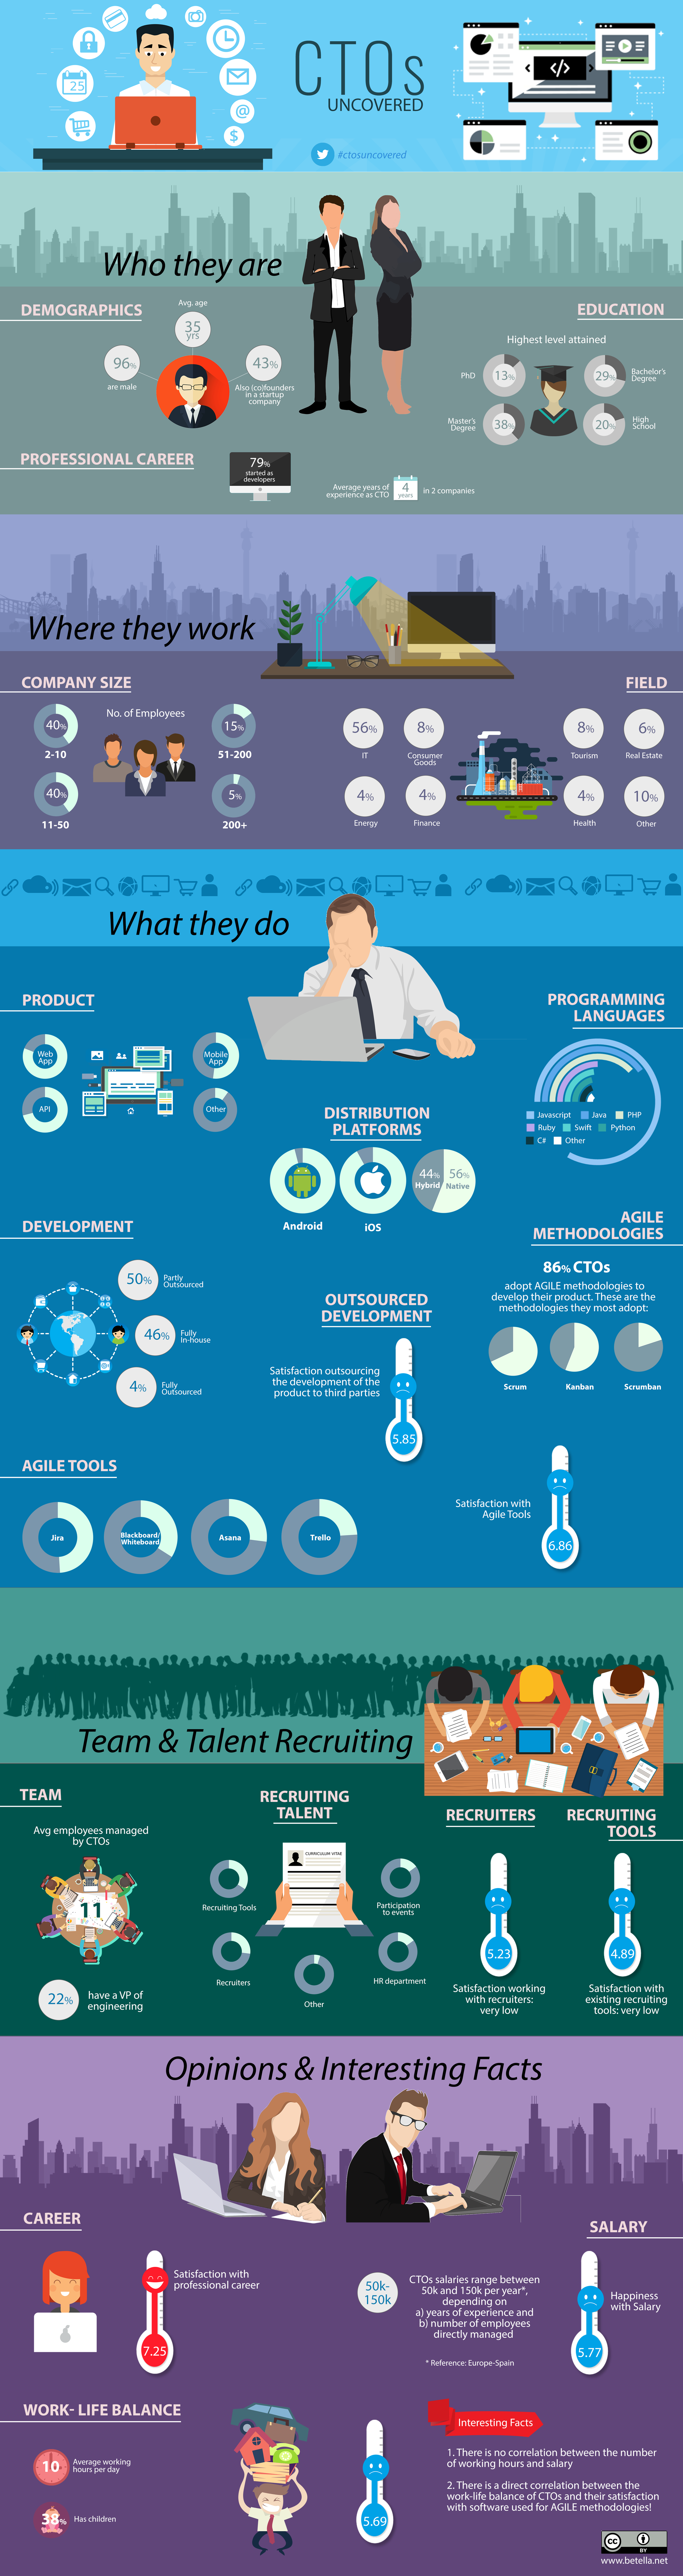 ctos_uncovered_infographic